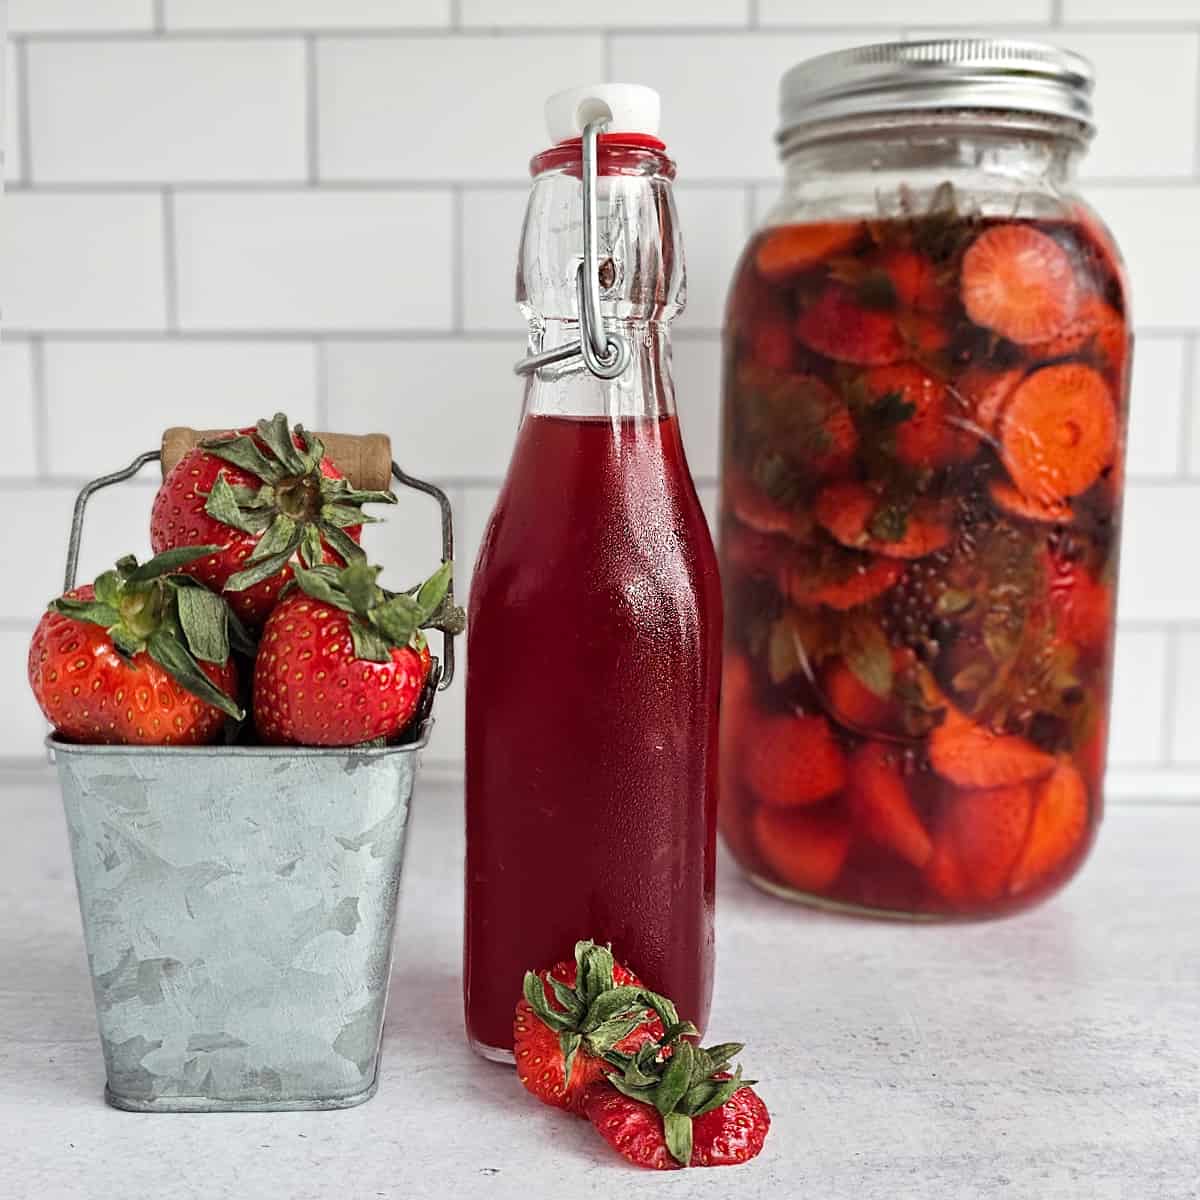 Bottle of strawberry syrup, A stack of strawberries in a metal container, a bottle of strawberry syrup, and a jar of strawberry-infused vinegar.